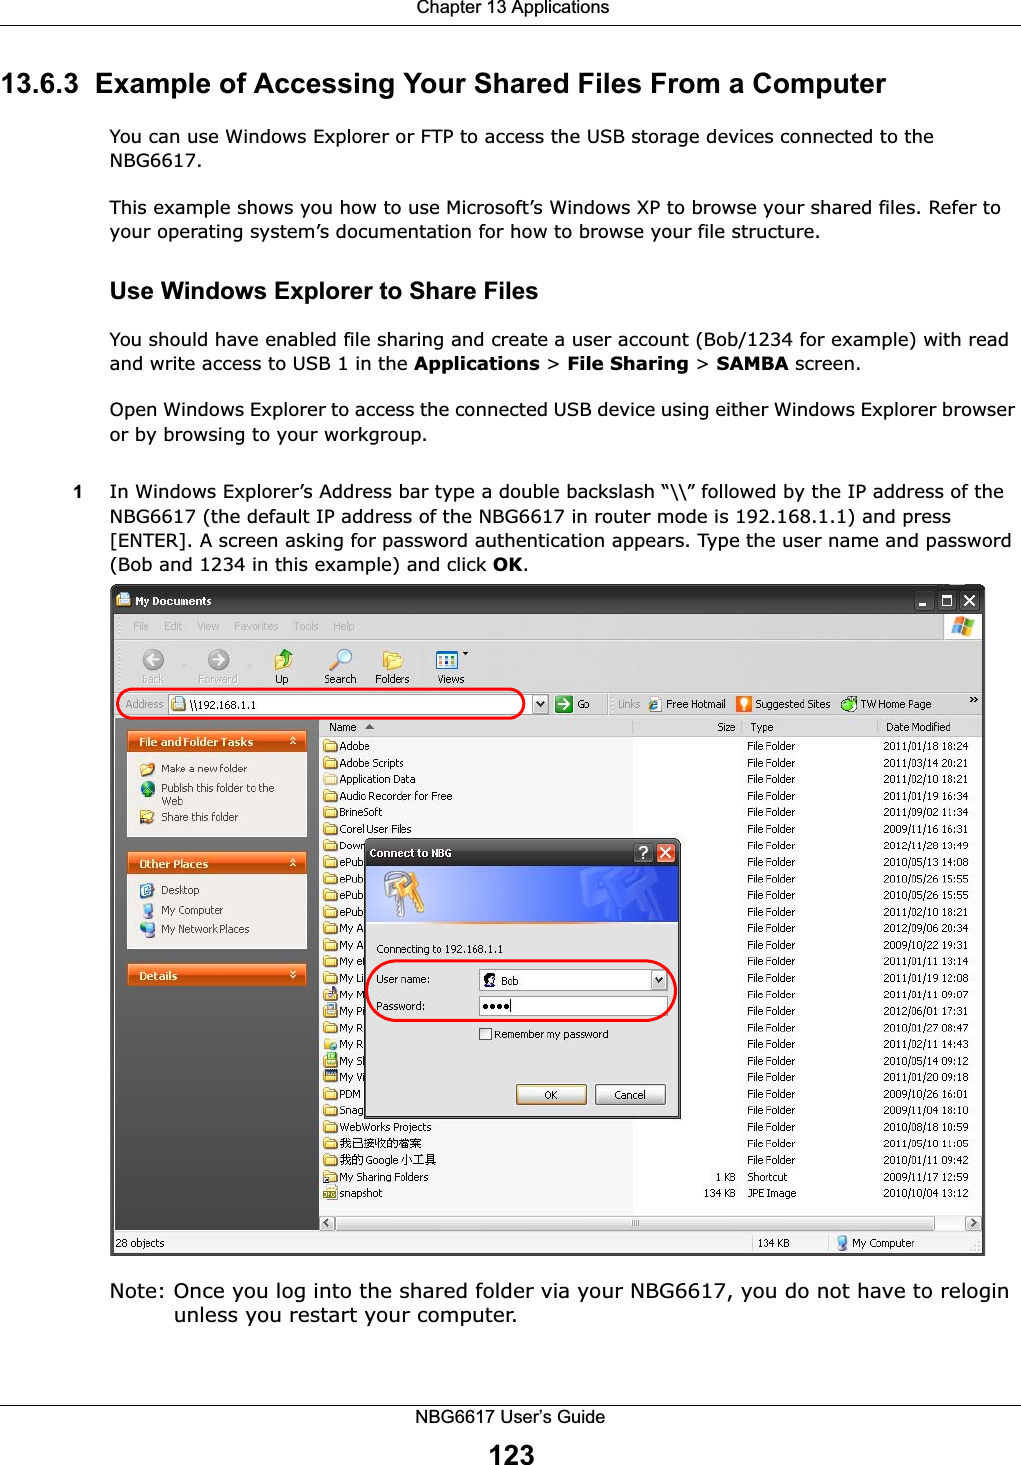  Chapter 13 ApplicationsNBG6617 User’s Guide12313.6.3  Example of Accessing Your Shared Files From a Computer You can use Windows Explorer or FTP to access the USB storage devices connected to the NBG6617.This example shows you how to use Microsoft’s Windows XP to browse your shared files. Refer to your operating system’s documentation for how to browse your file structure. Use Windows Explorer to Share Files You should have enabled file sharing and create a user account (Bob/1234 for example) with read and write access to USB 1 in the Applications &gt; File Sharing &gt; SAMBA screen.Open Windows Explorer to access the connected USB device using either Windows Explorer browser or by browsing to your workgroup.1In Windows Explorer’s Address bar type a double backslash “\\” followed by the IP address of the NBG6617 (the default IP address of the NBG6617 in router mode is 192.168.1.1) and press [ENTER]. A screen asking for password authentication appears. Type the user name and password (Bob and 1234 in this example) and click OK.Note: Once you log into the shared folder via your NBG6617, you do not have to relogin unless you restart your computer. 